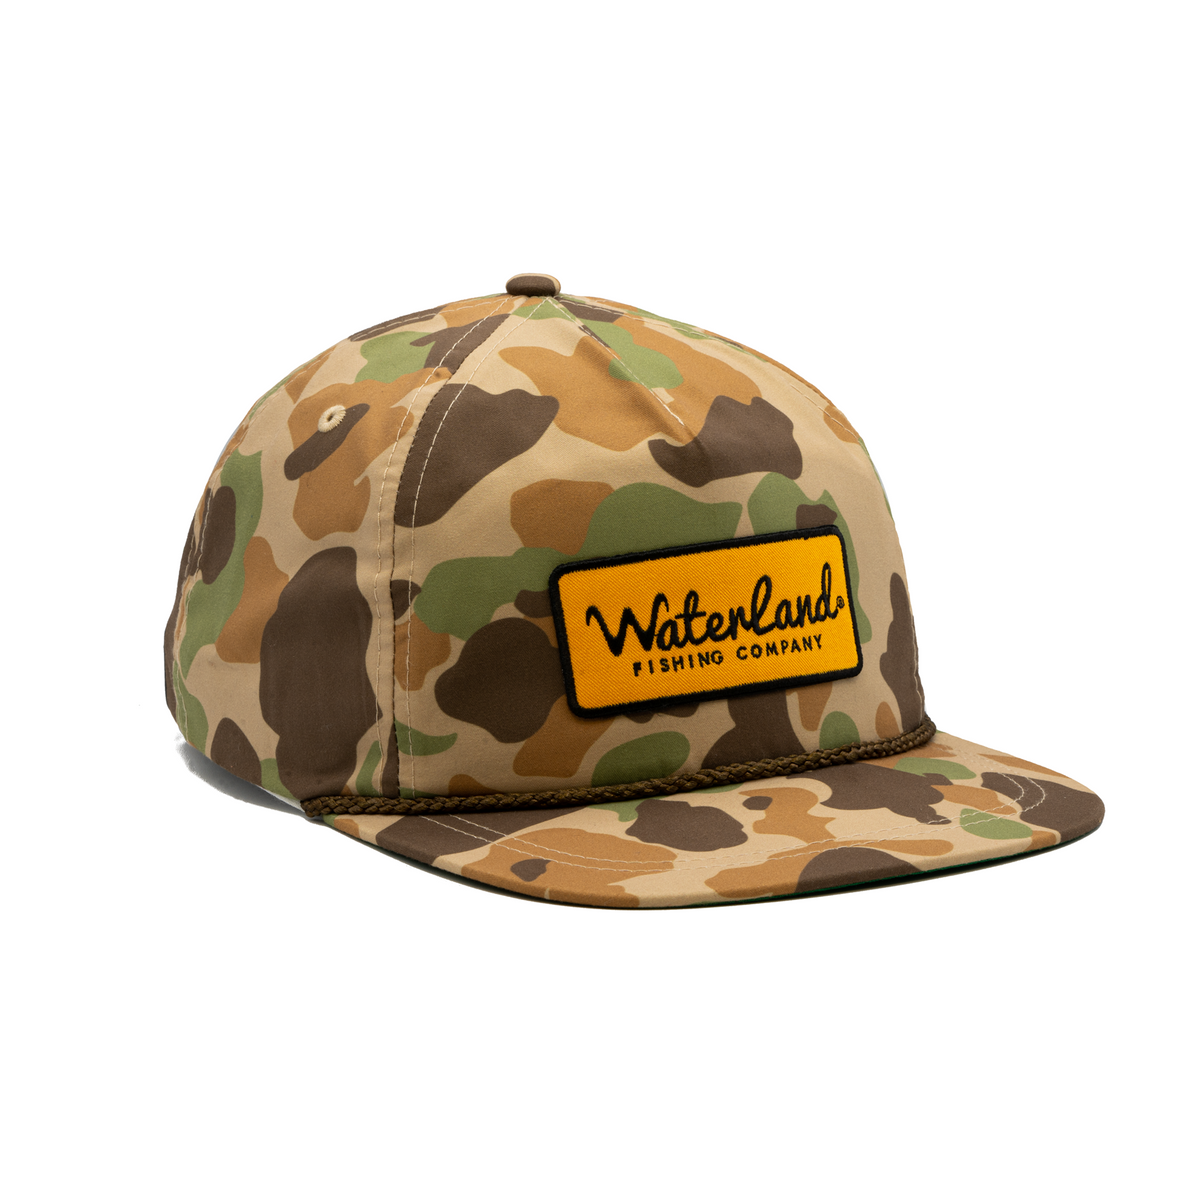 WaterLand Co. - Premium SnapBack Hats - The Old Timer Series